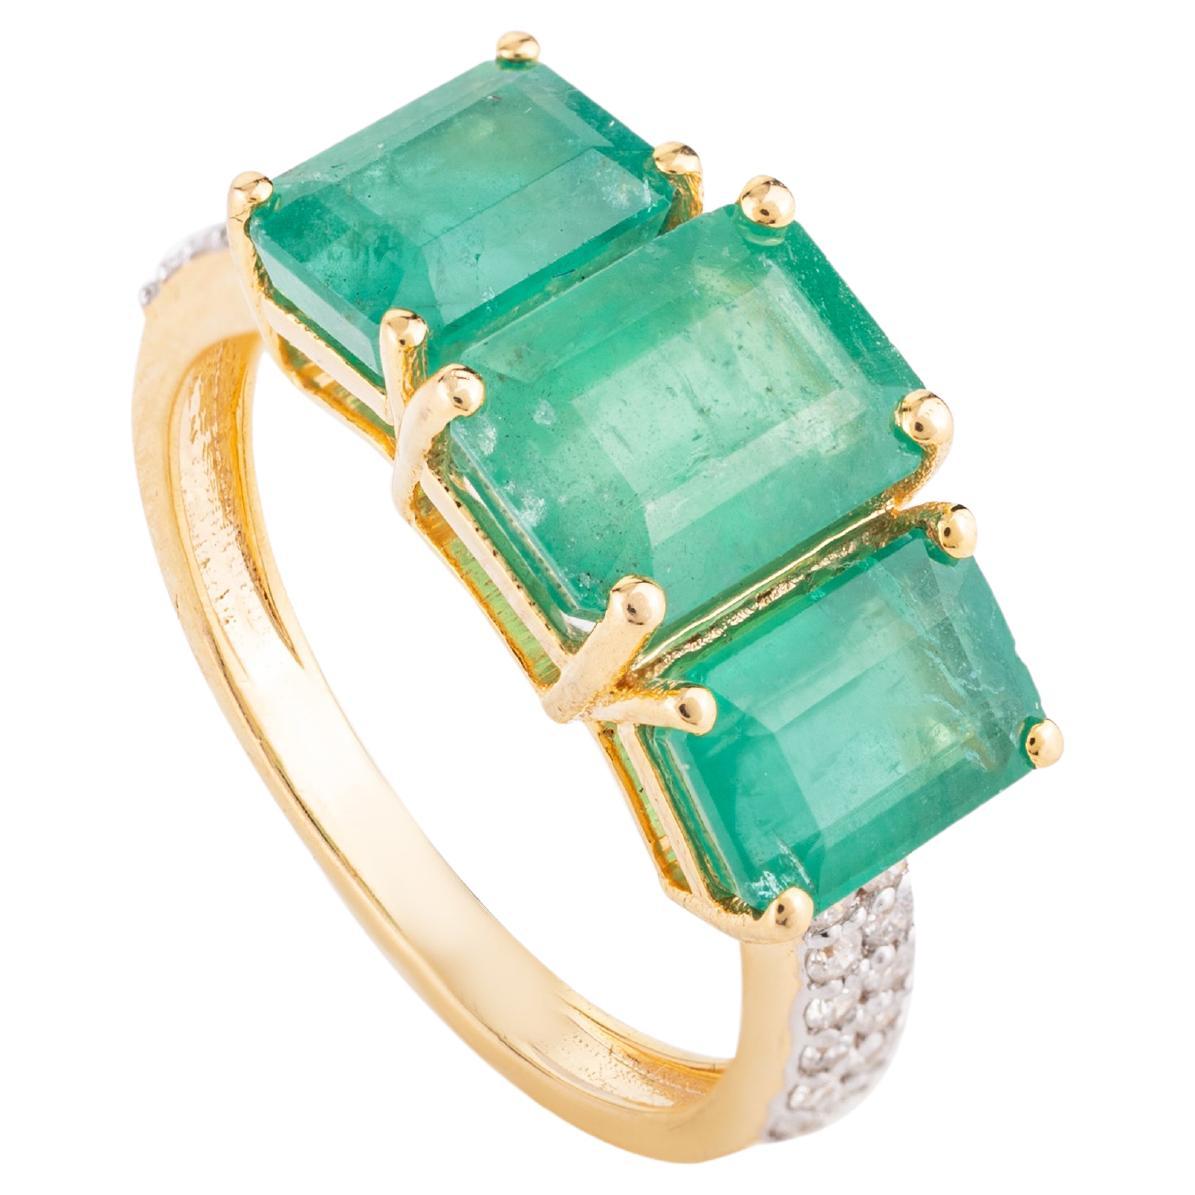 For Sale:  Genuine 4.14 CTW Three Stone Emerald Ring in 18k Solid Yellow Gold